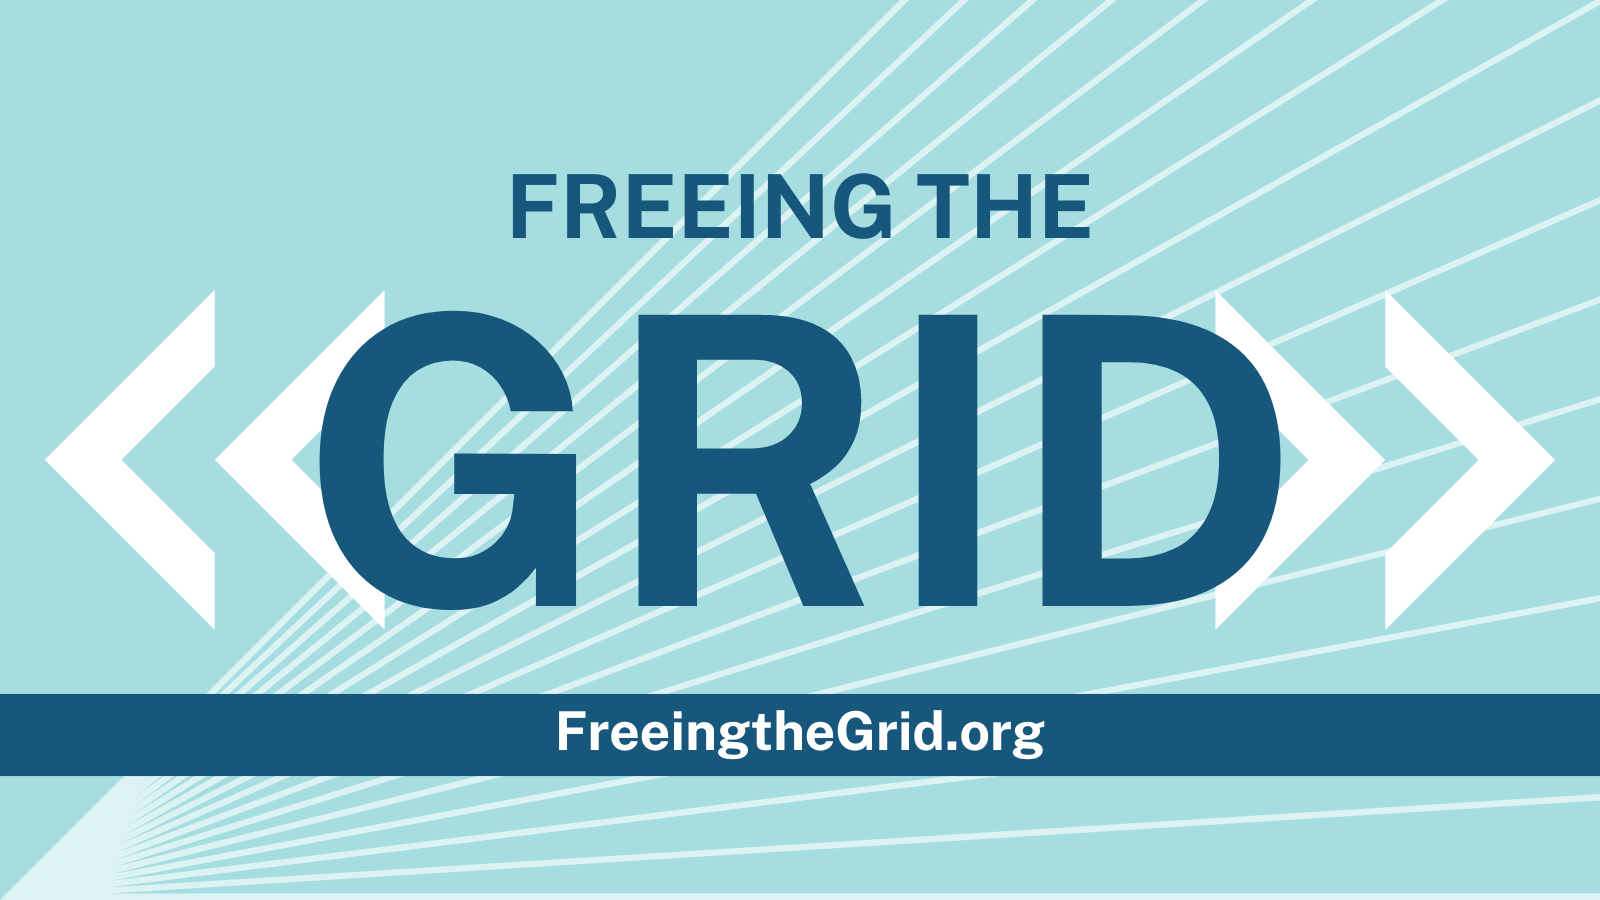 Webinar: Freeing the Grid: Ranking U.S. States’ Interconnection Policies